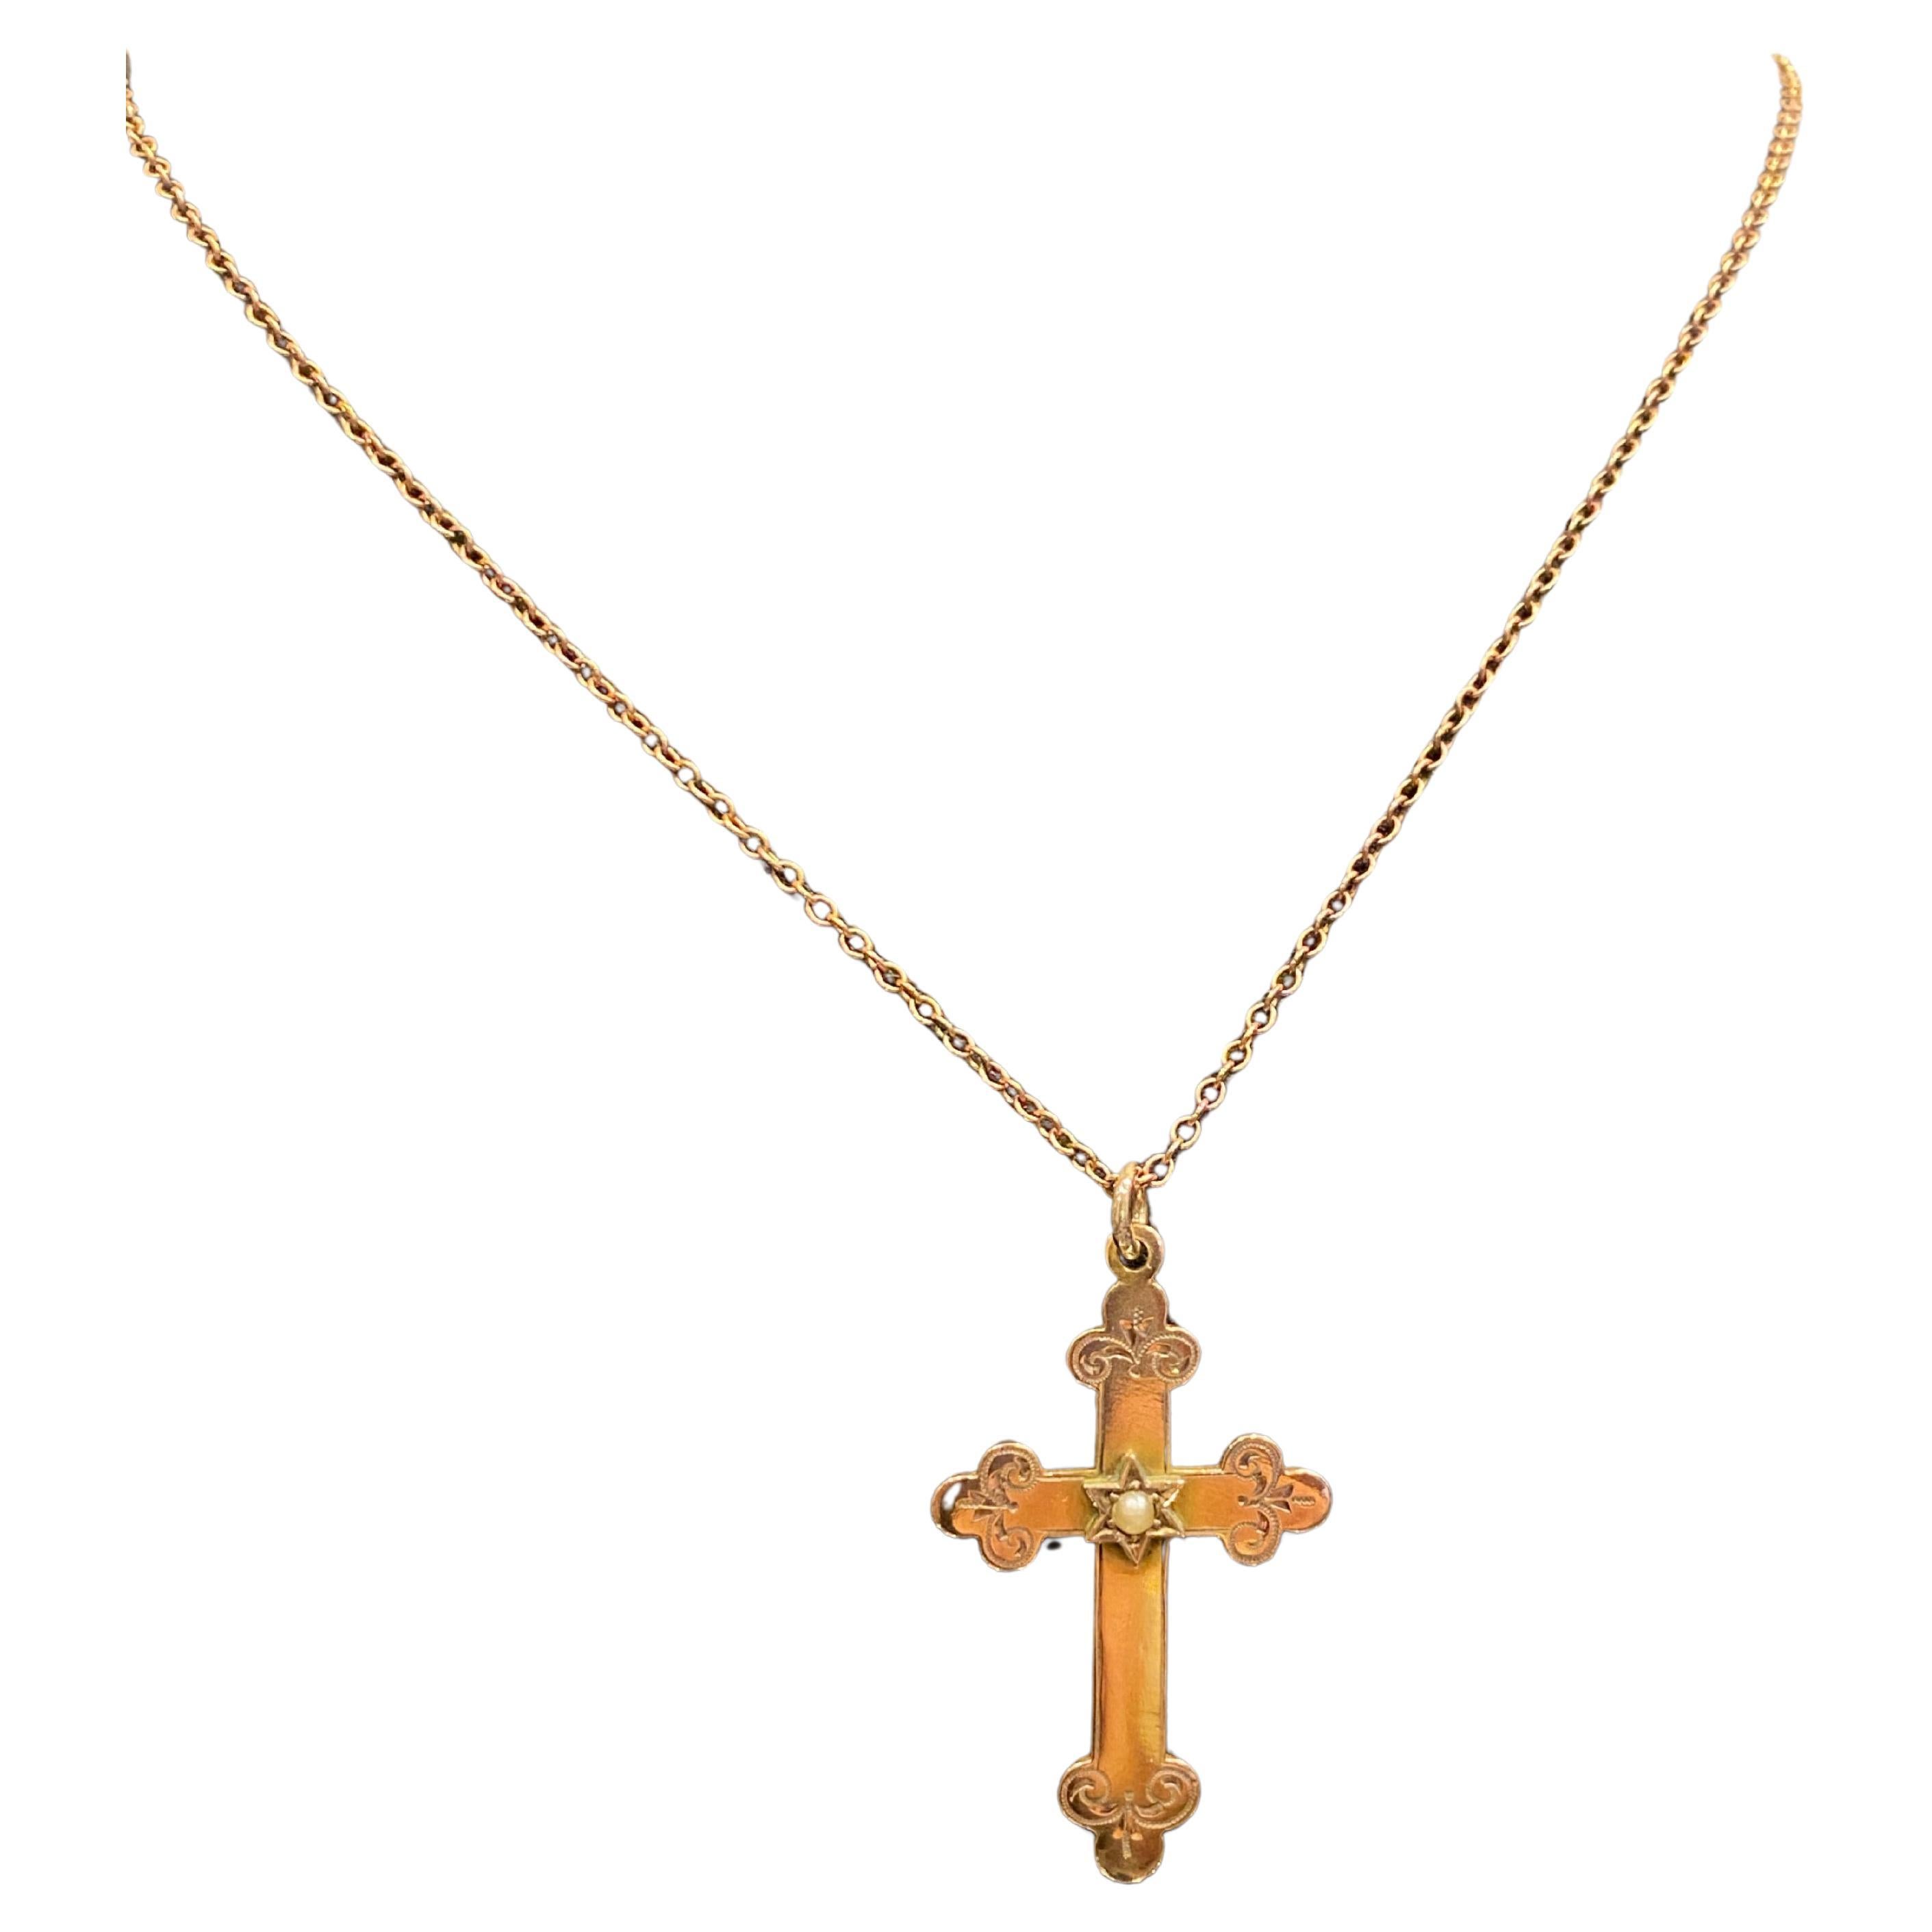 An Antique, circa 1900's Australian made 
Eastern Orthodox Cruciform Pendant / Cross / Crucifix, 
custom made, bespoke 
beautifully engraved & designed in Fleur De Lis motif 

Meticulously crafted in 9K Yellow Gold, 
Centering an intricate